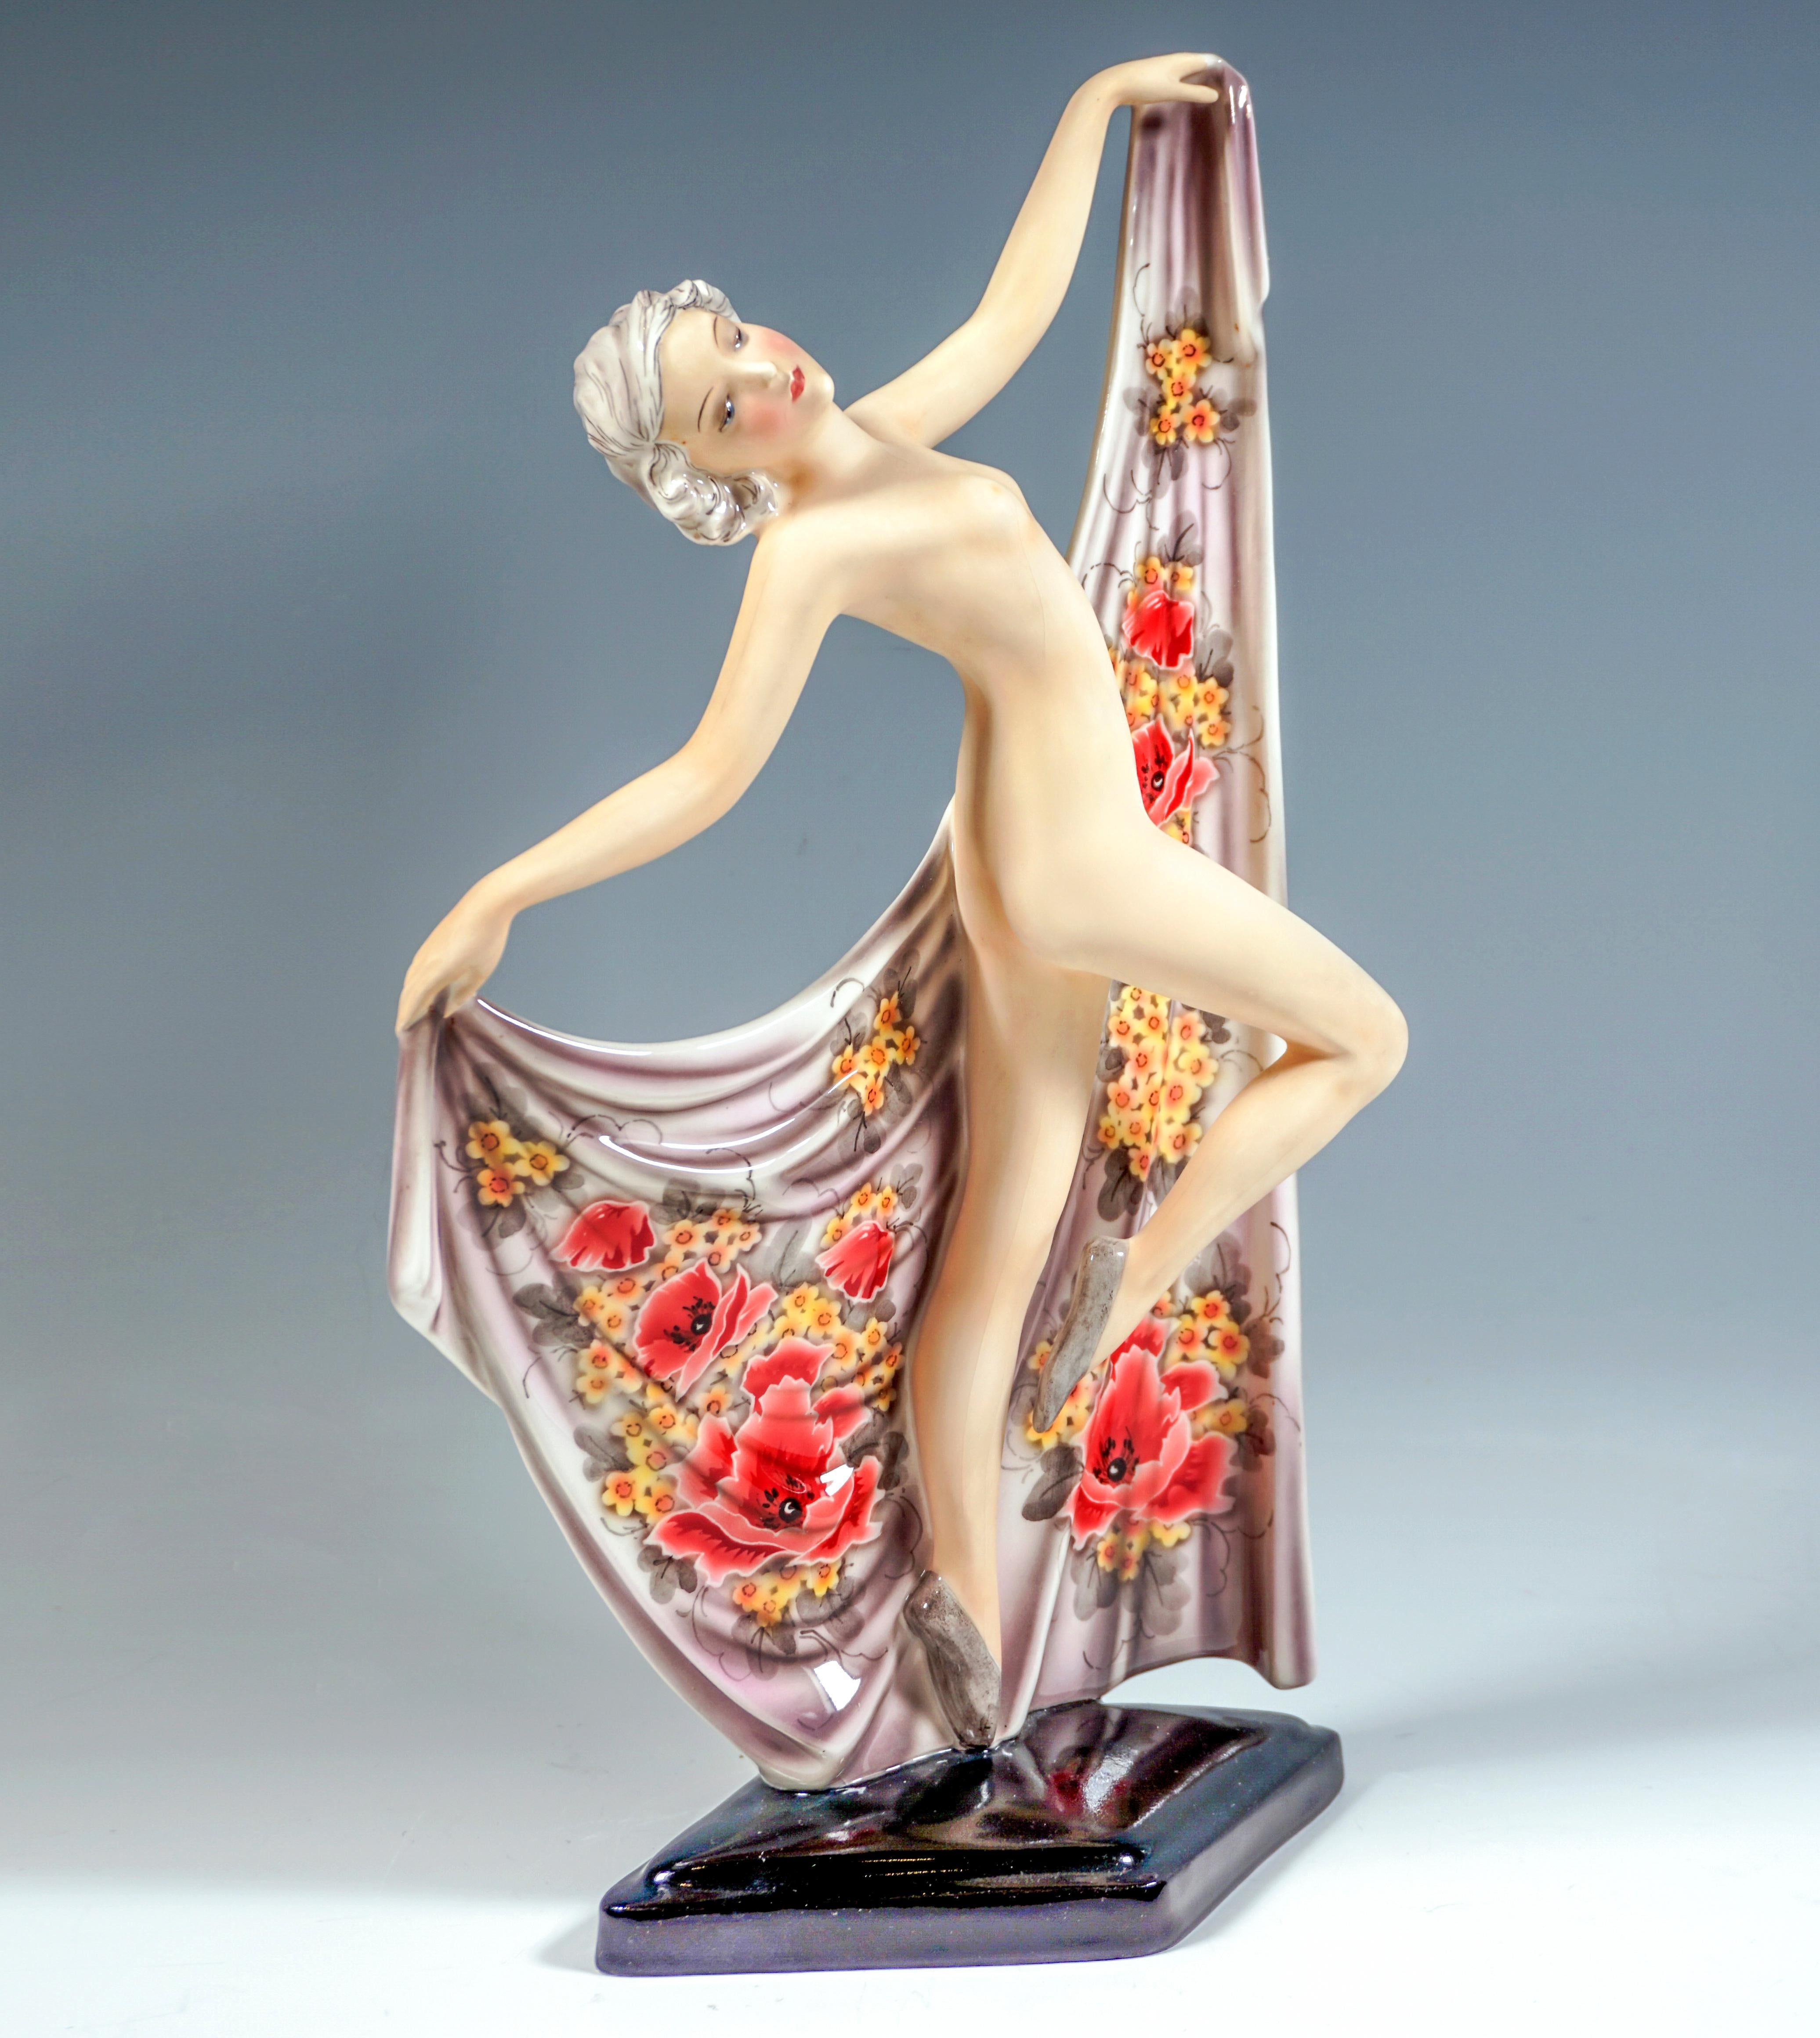 Rare Goldscheider ceramic figurine of the late 1930s:
Only with ballet shoes dressed young pretty lady with curly hair, with turned to the side and tilted backwards upper body balancing on the left tiptoes, pulling up the right leg, and holding up a